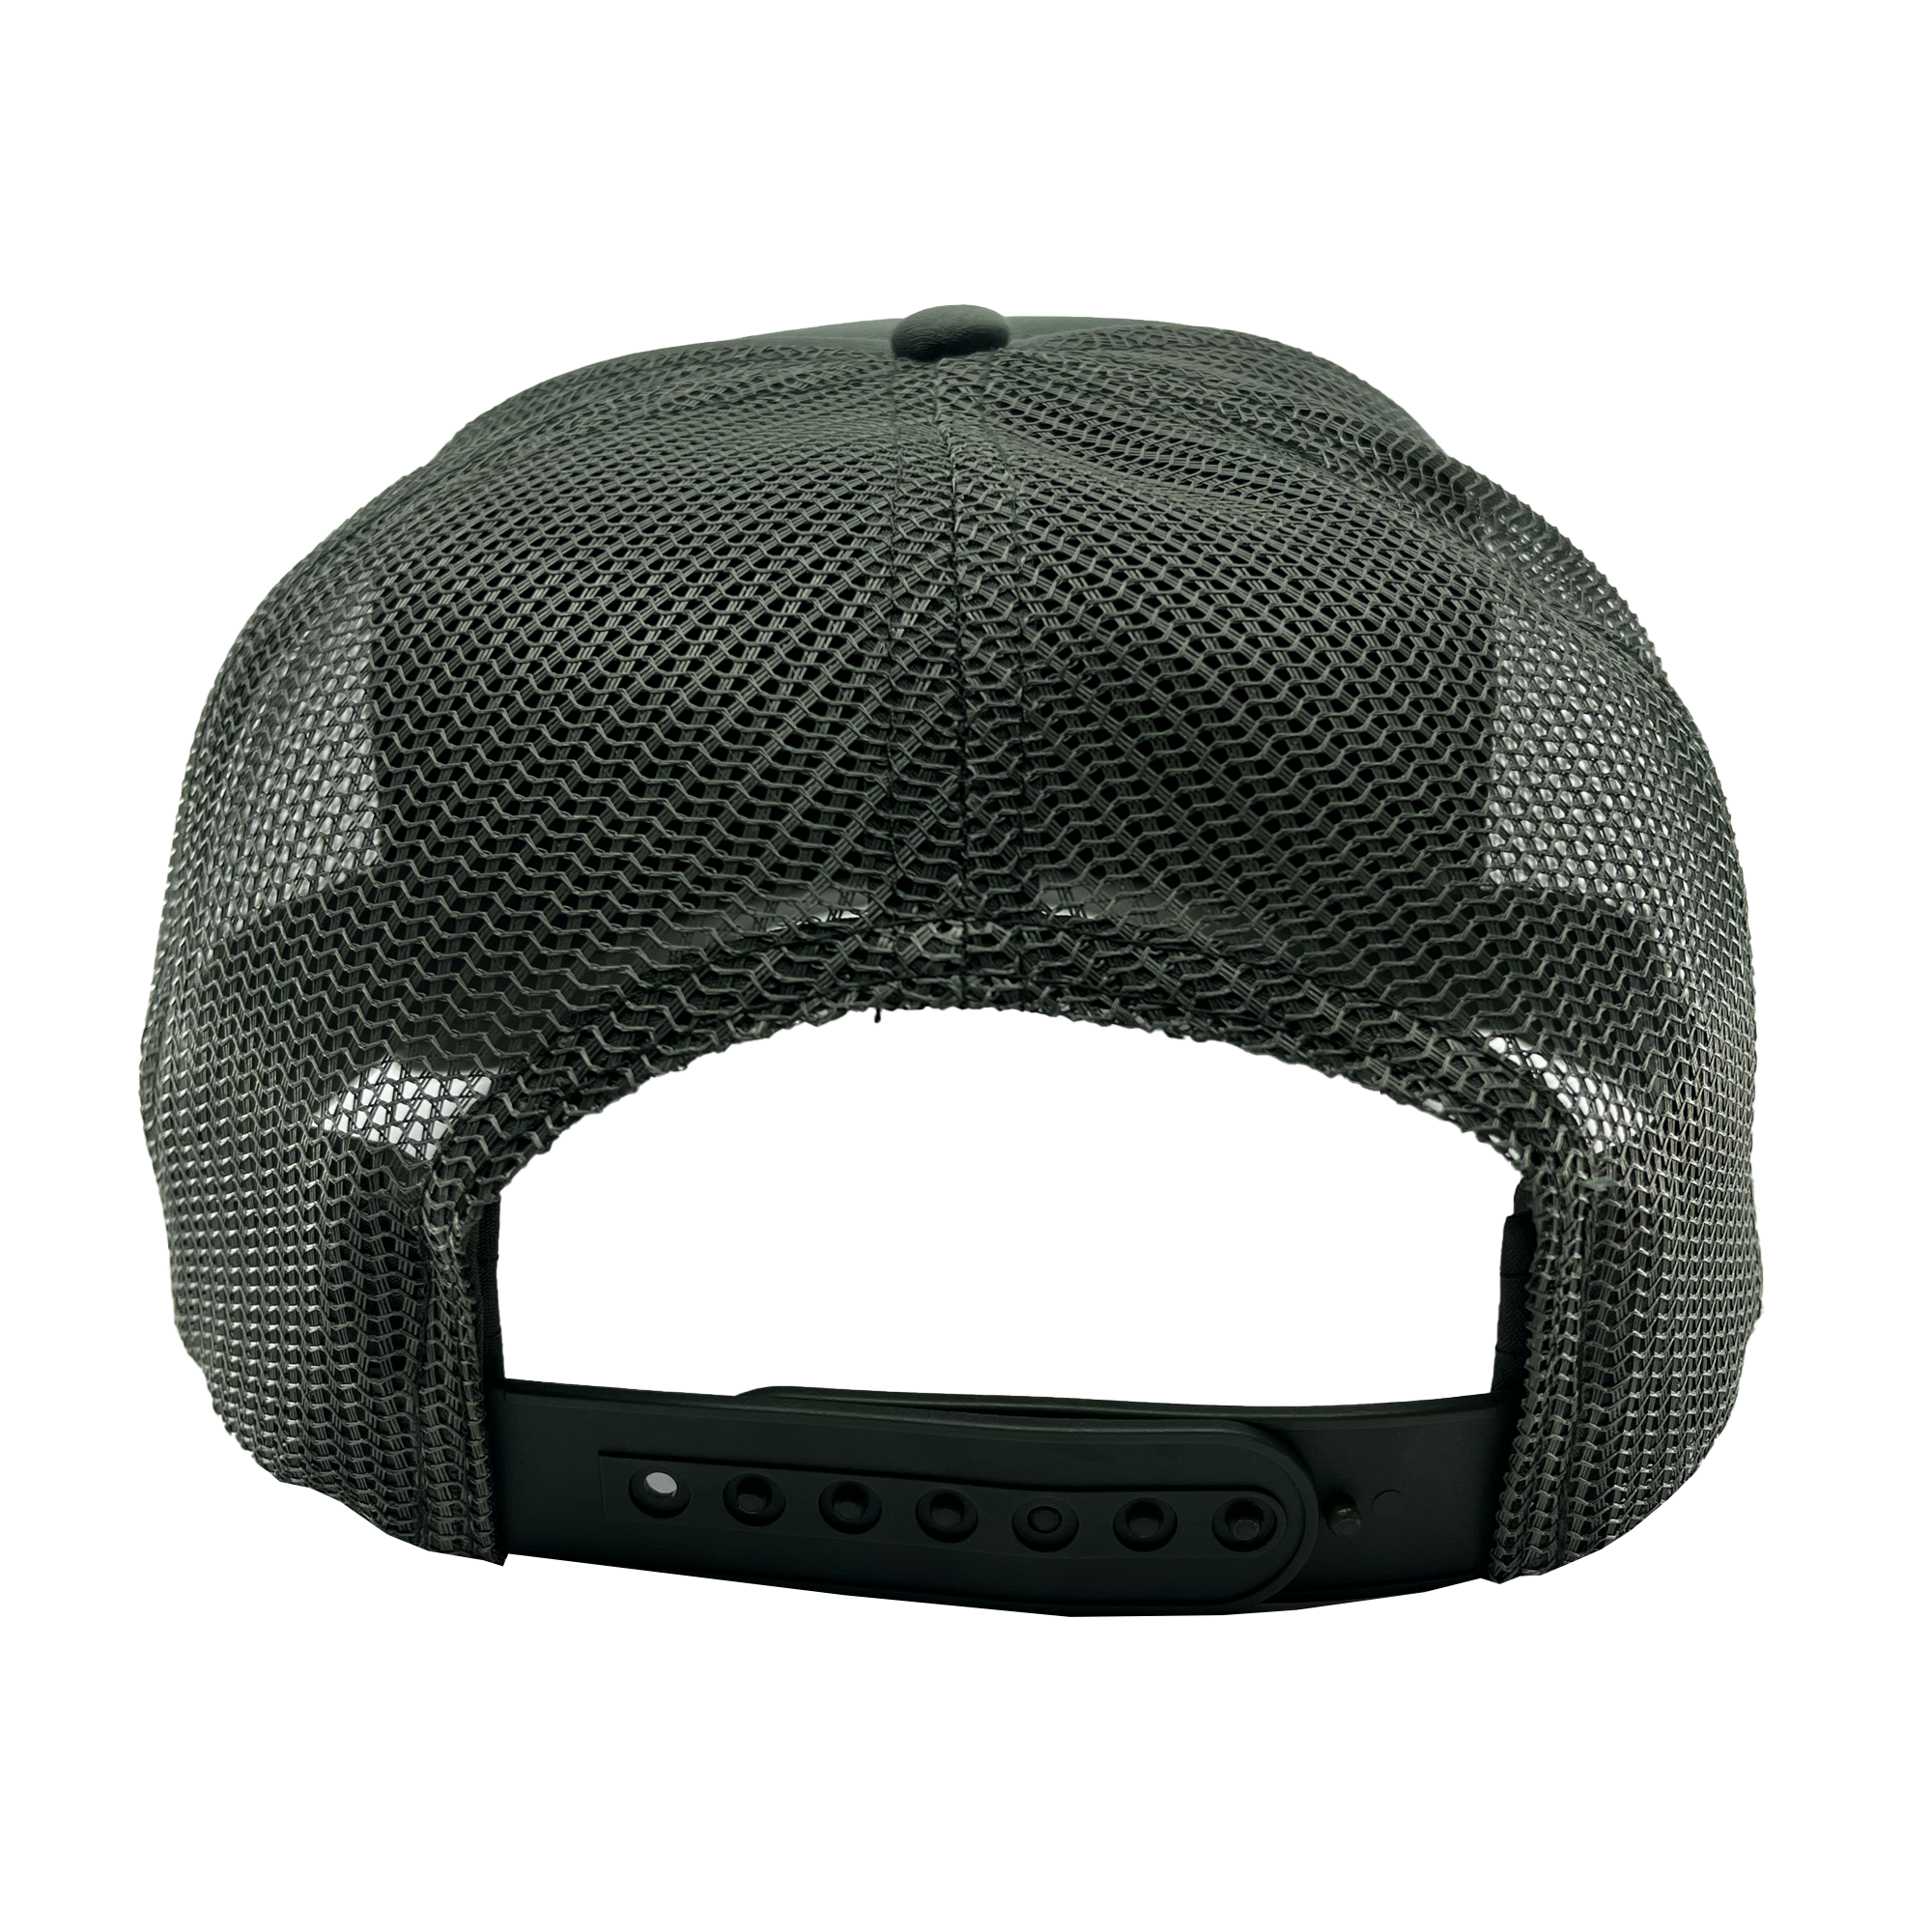 Back view of the mesh back and adjustable strap on a cypress green trucker cap.